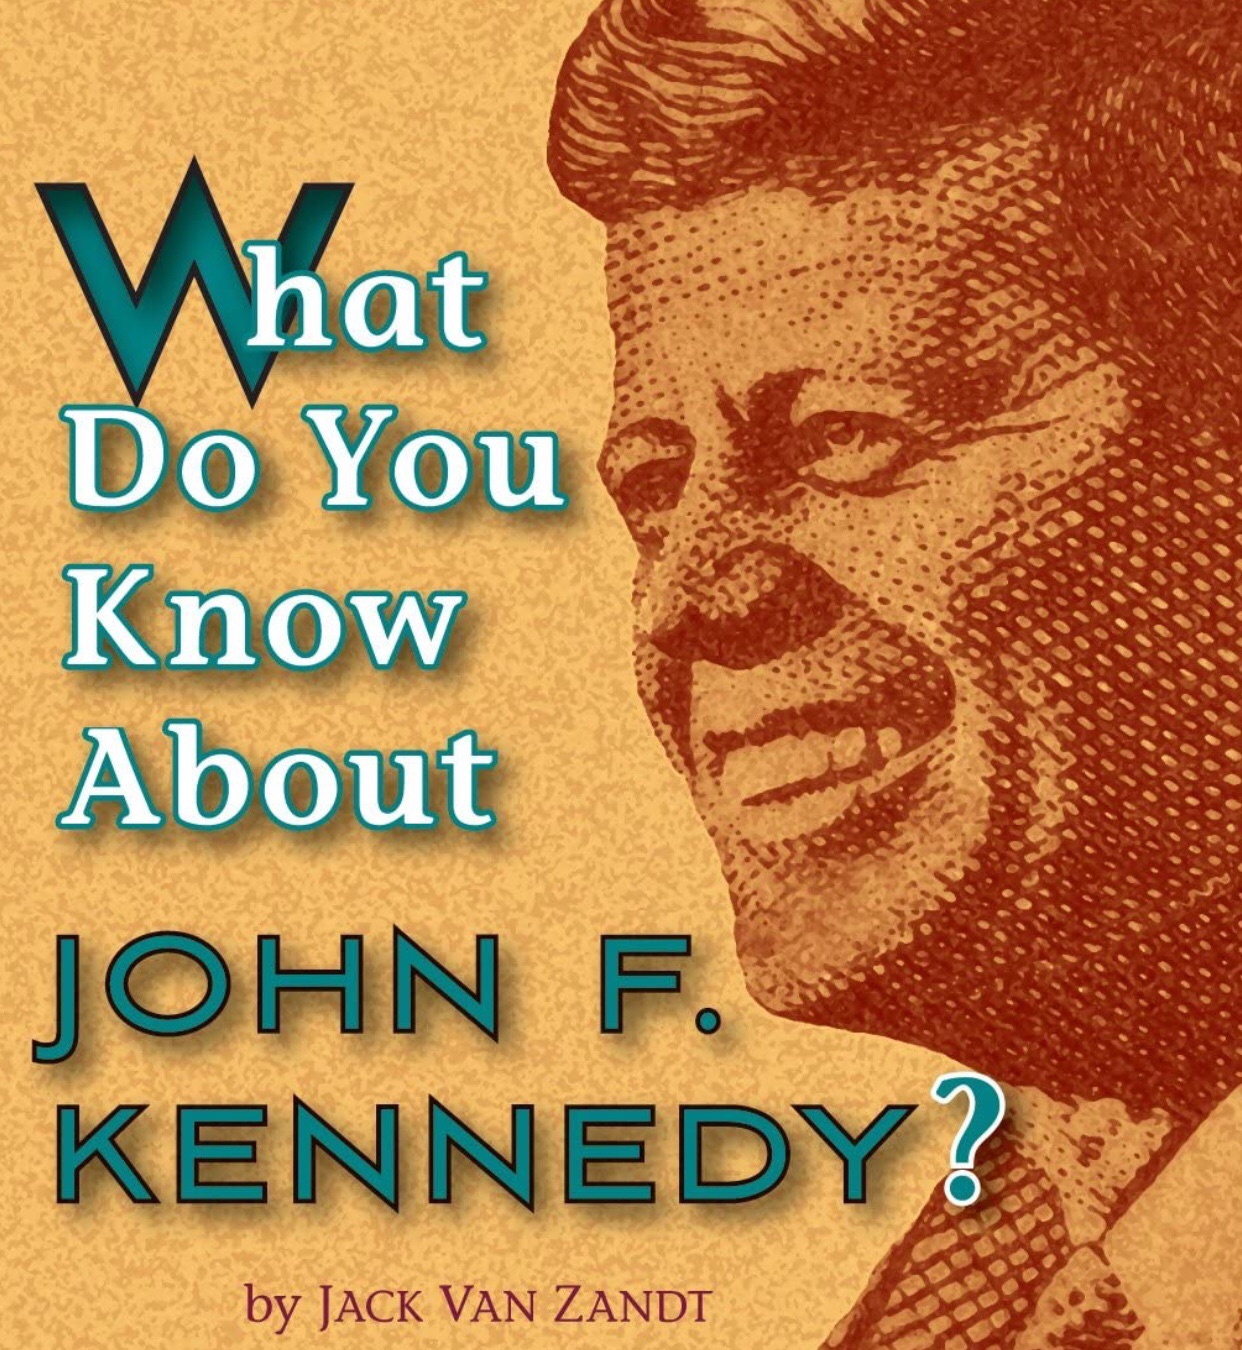 ??What Do You Know About John F. Kennedy? Knowledge Cards Quiz Deck??